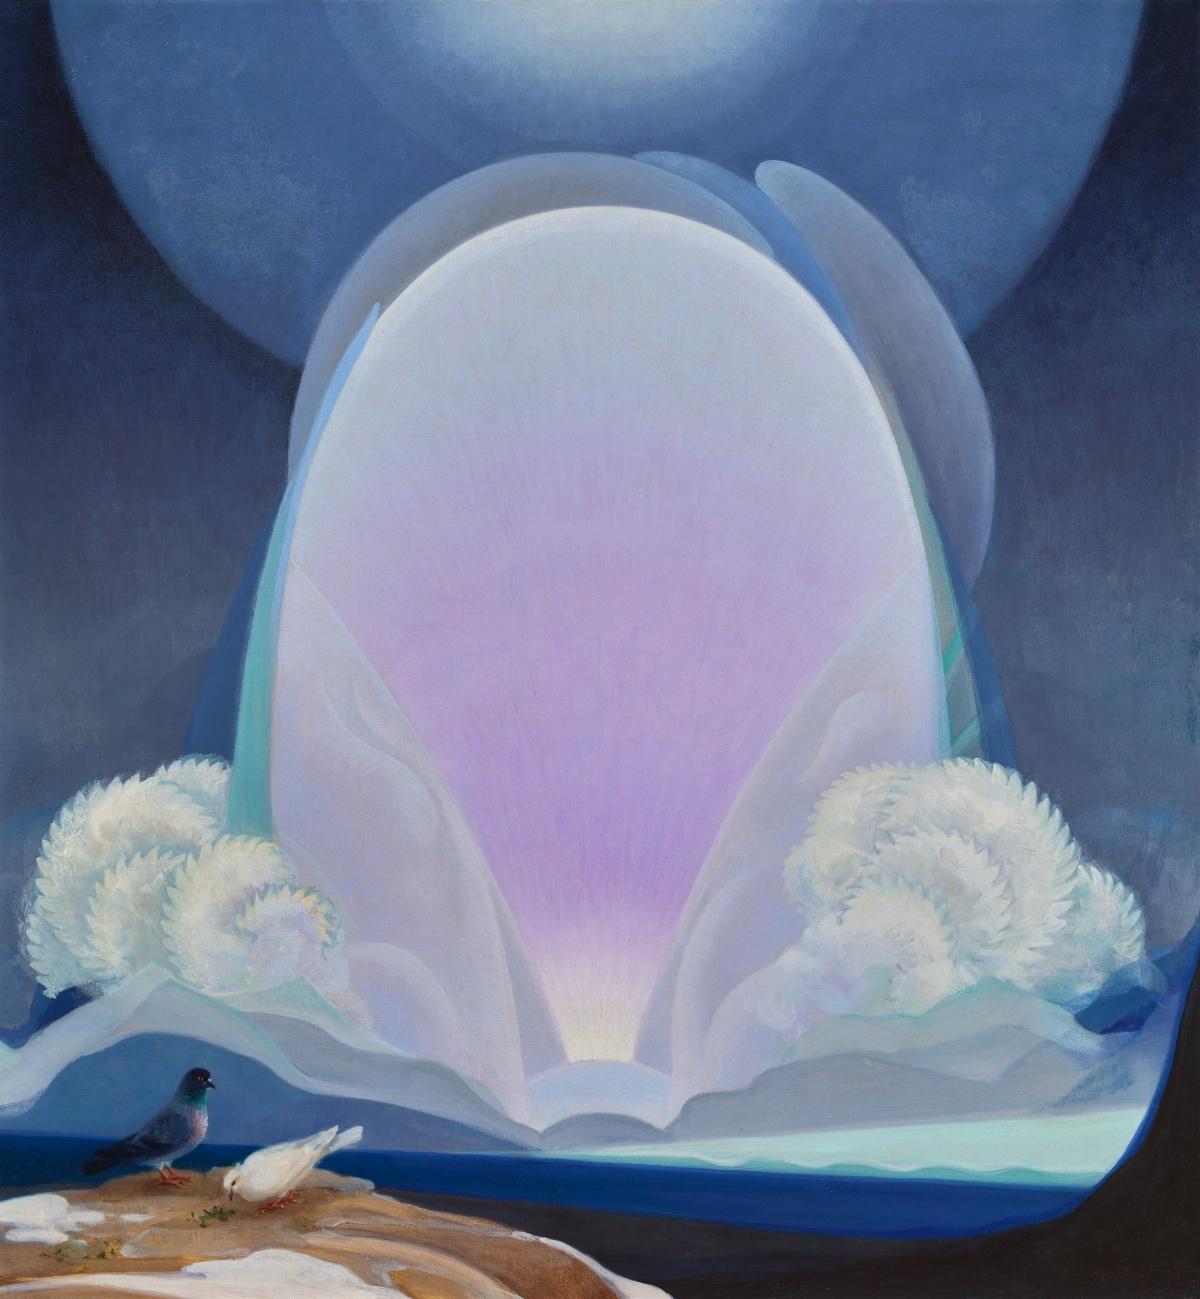 Agnes Pelton (American, born Germany, 1881–1961), Winter, 1933. Oil on canvas, 30 x 28 in. Crocker Art Museum Purchase; Paul LeBaron Thiebaud, George and Bea Gibson Fund, Denise and Donald C. Timmons, Melza and Ted Barr, Sandra Jones, Linda M. Lawrence, Nancy Lawrence and Gordon Klein, Nancy S. and Dennis N. Marks, William L. Snider and Brian Cameron, Stephenson Foundation, Alan Templeton, A.J. and Susana Mollinet Watson, and other donors, 2013.54